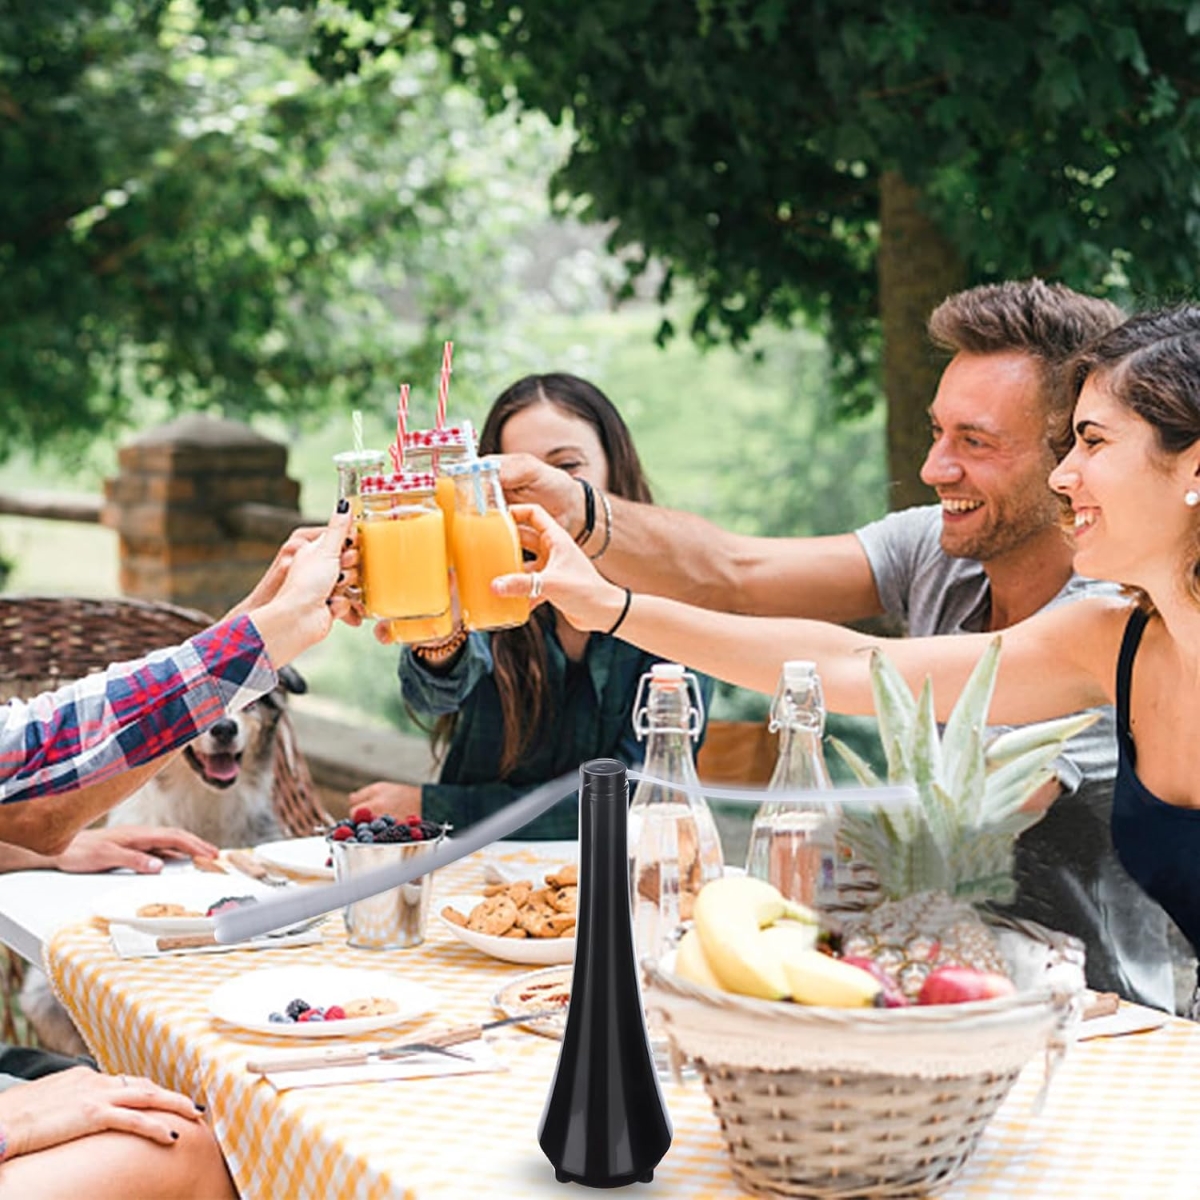 Group of friends enjoying an outdoor picnic with fan on table.